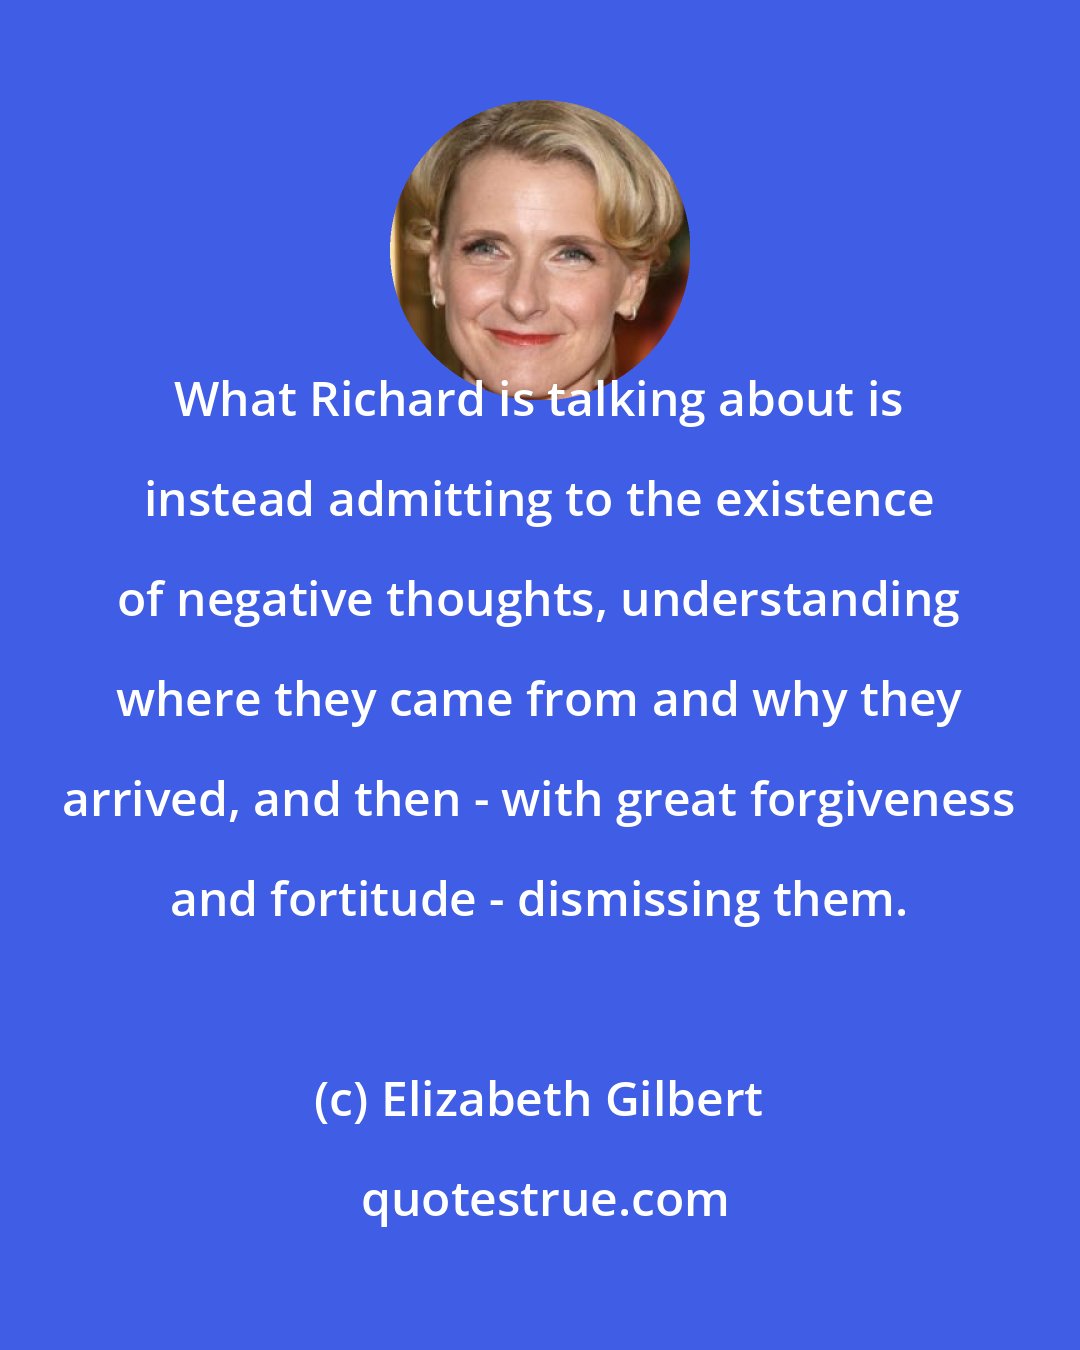 Elizabeth Gilbert: What Richard is talking about is instead admitting to the existence of negative thoughts, understanding where they came from and why they arrived, and then - with great forgiveness and fortitude - dismissing them.